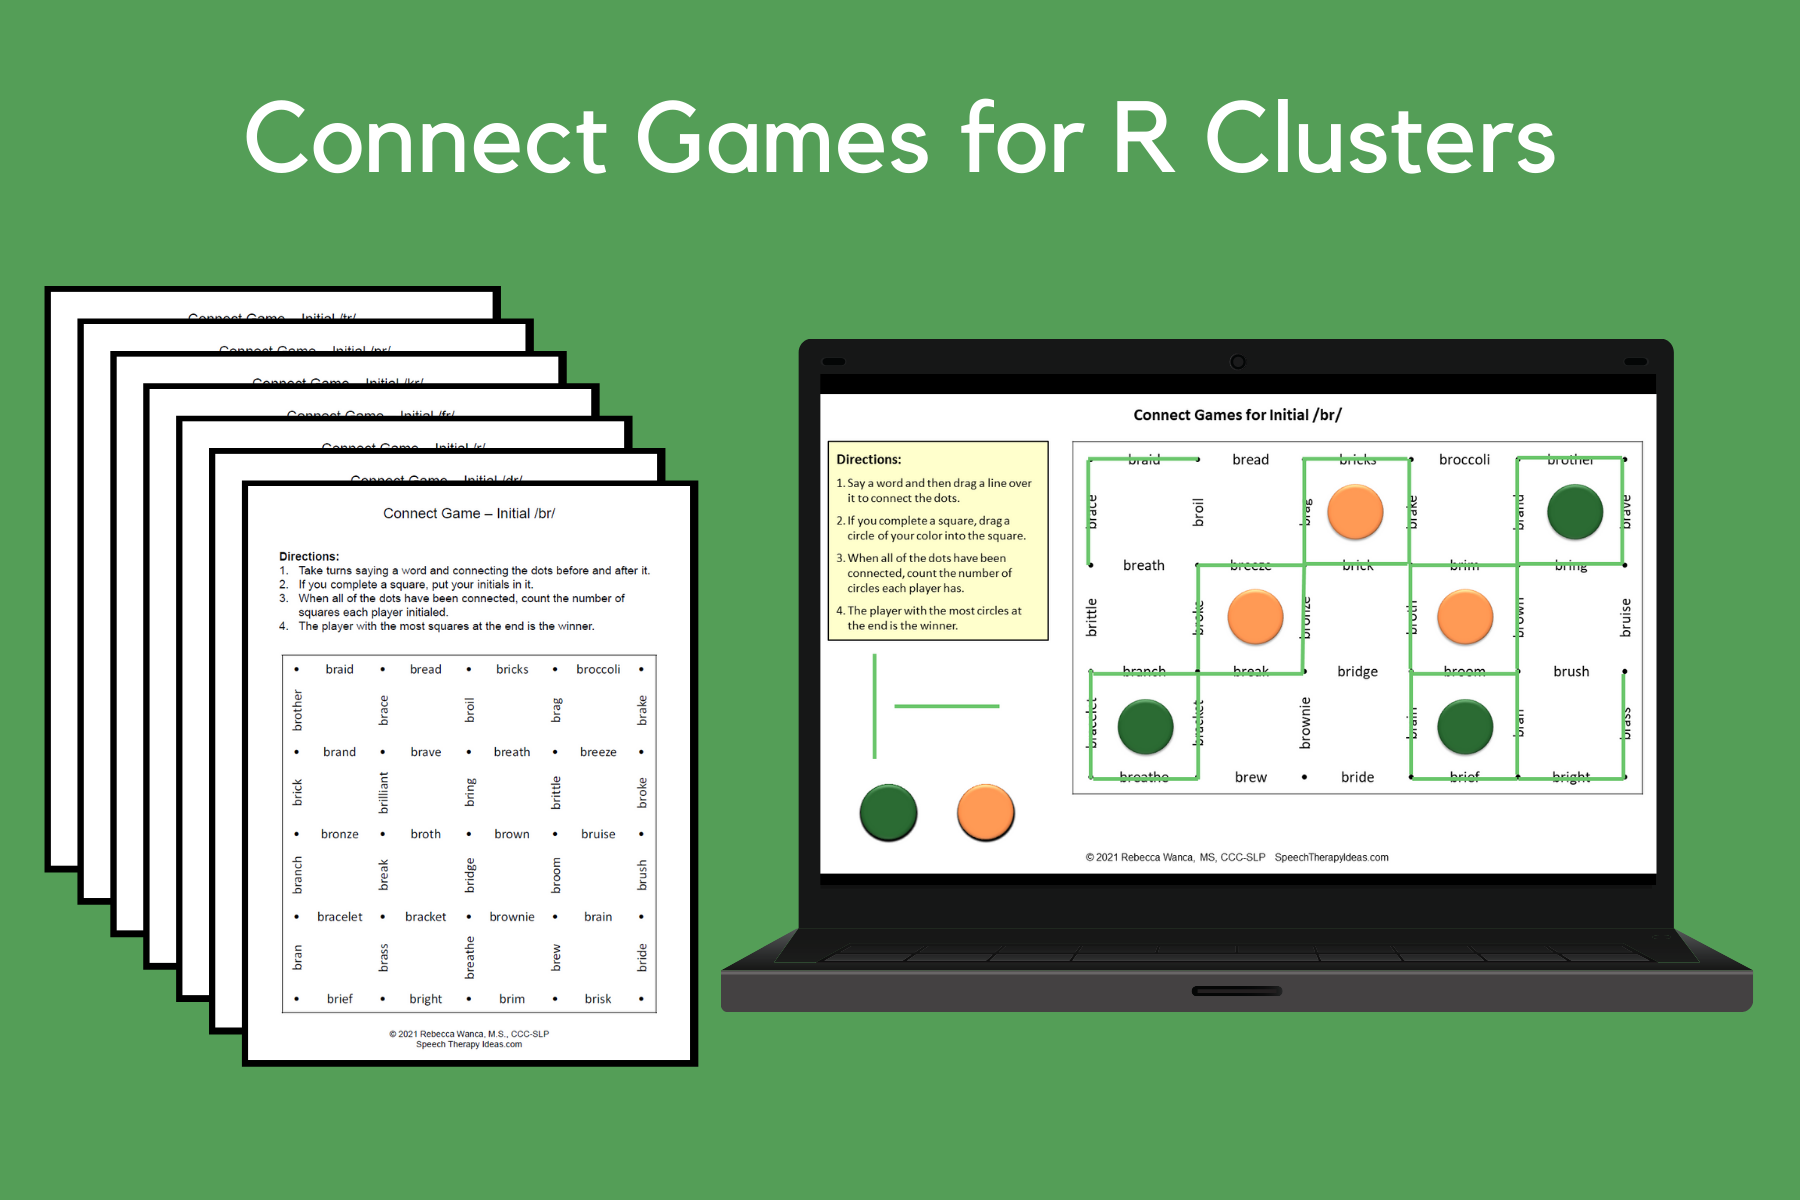 Connect Games for R Clusters